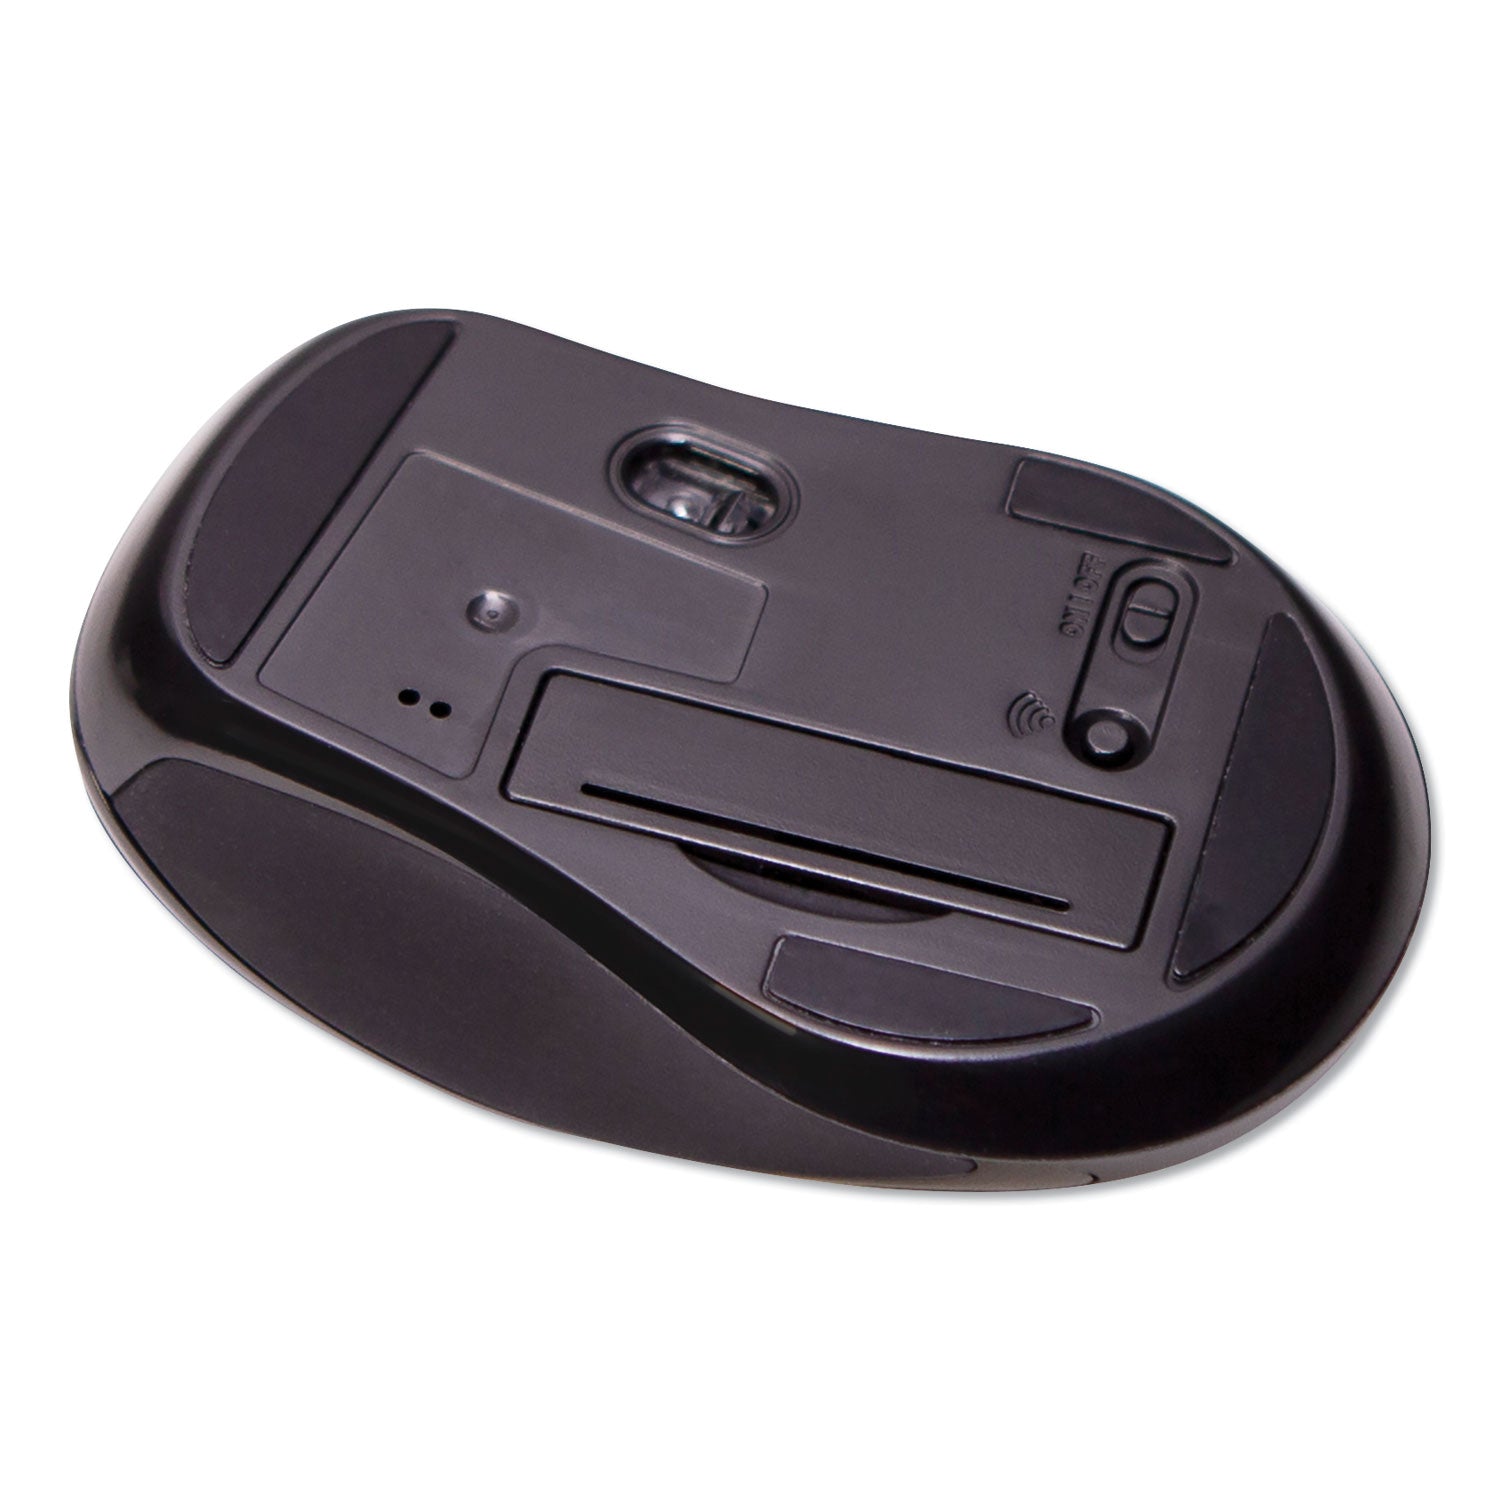 mid-size-wireless-optical-mouse-with-micro-usb-24-ghz-frequency-26-ft-wireless-range-right-hand-use-black_ivr61500 - 4